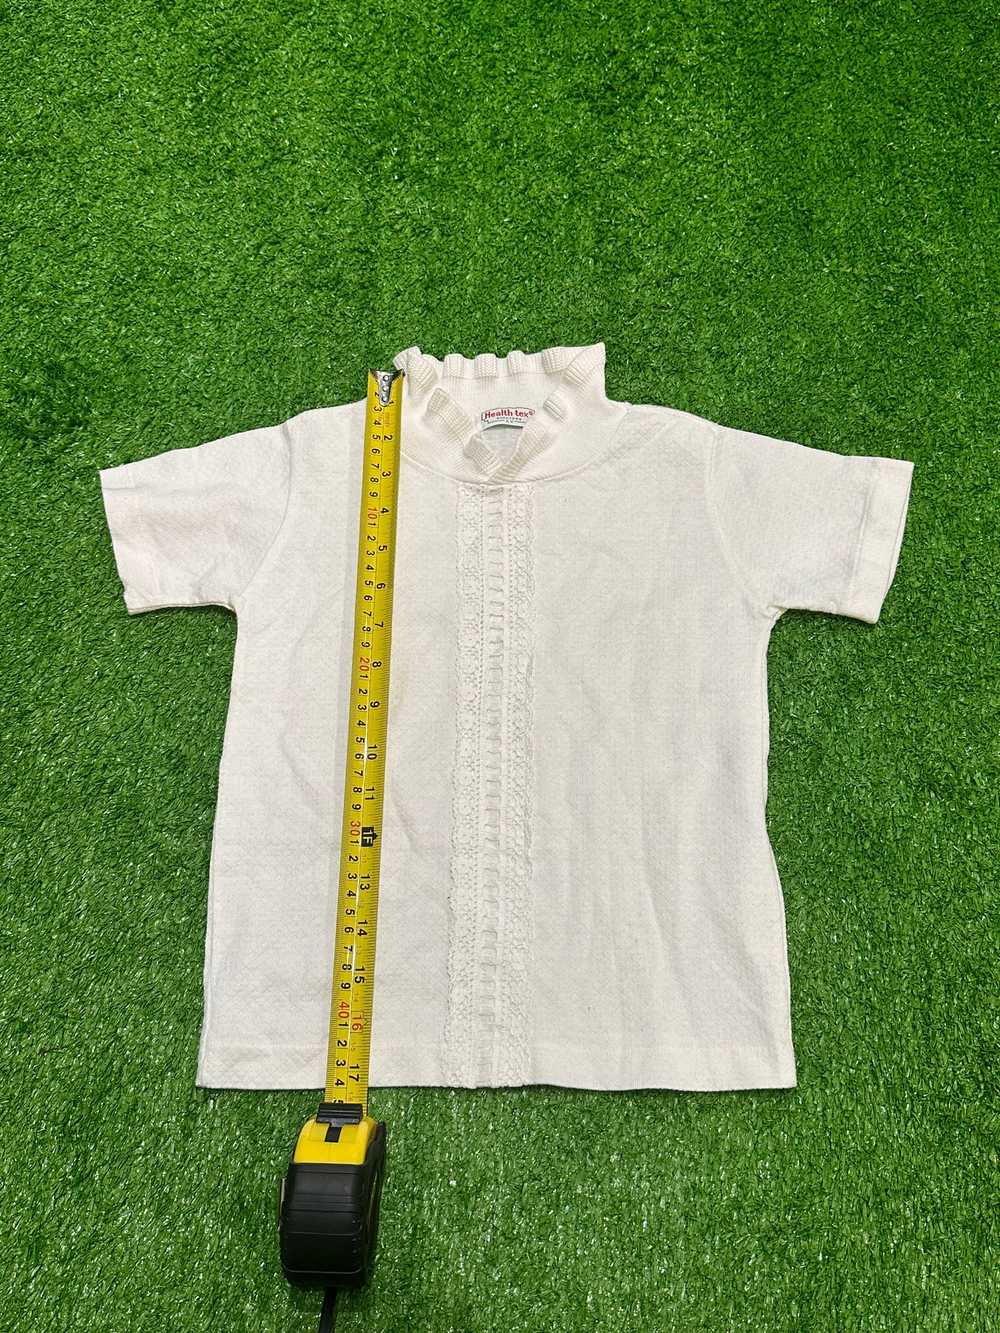 Health-Tex Stantogs Lace Tee Youth Size 6x (6.5) - image 3